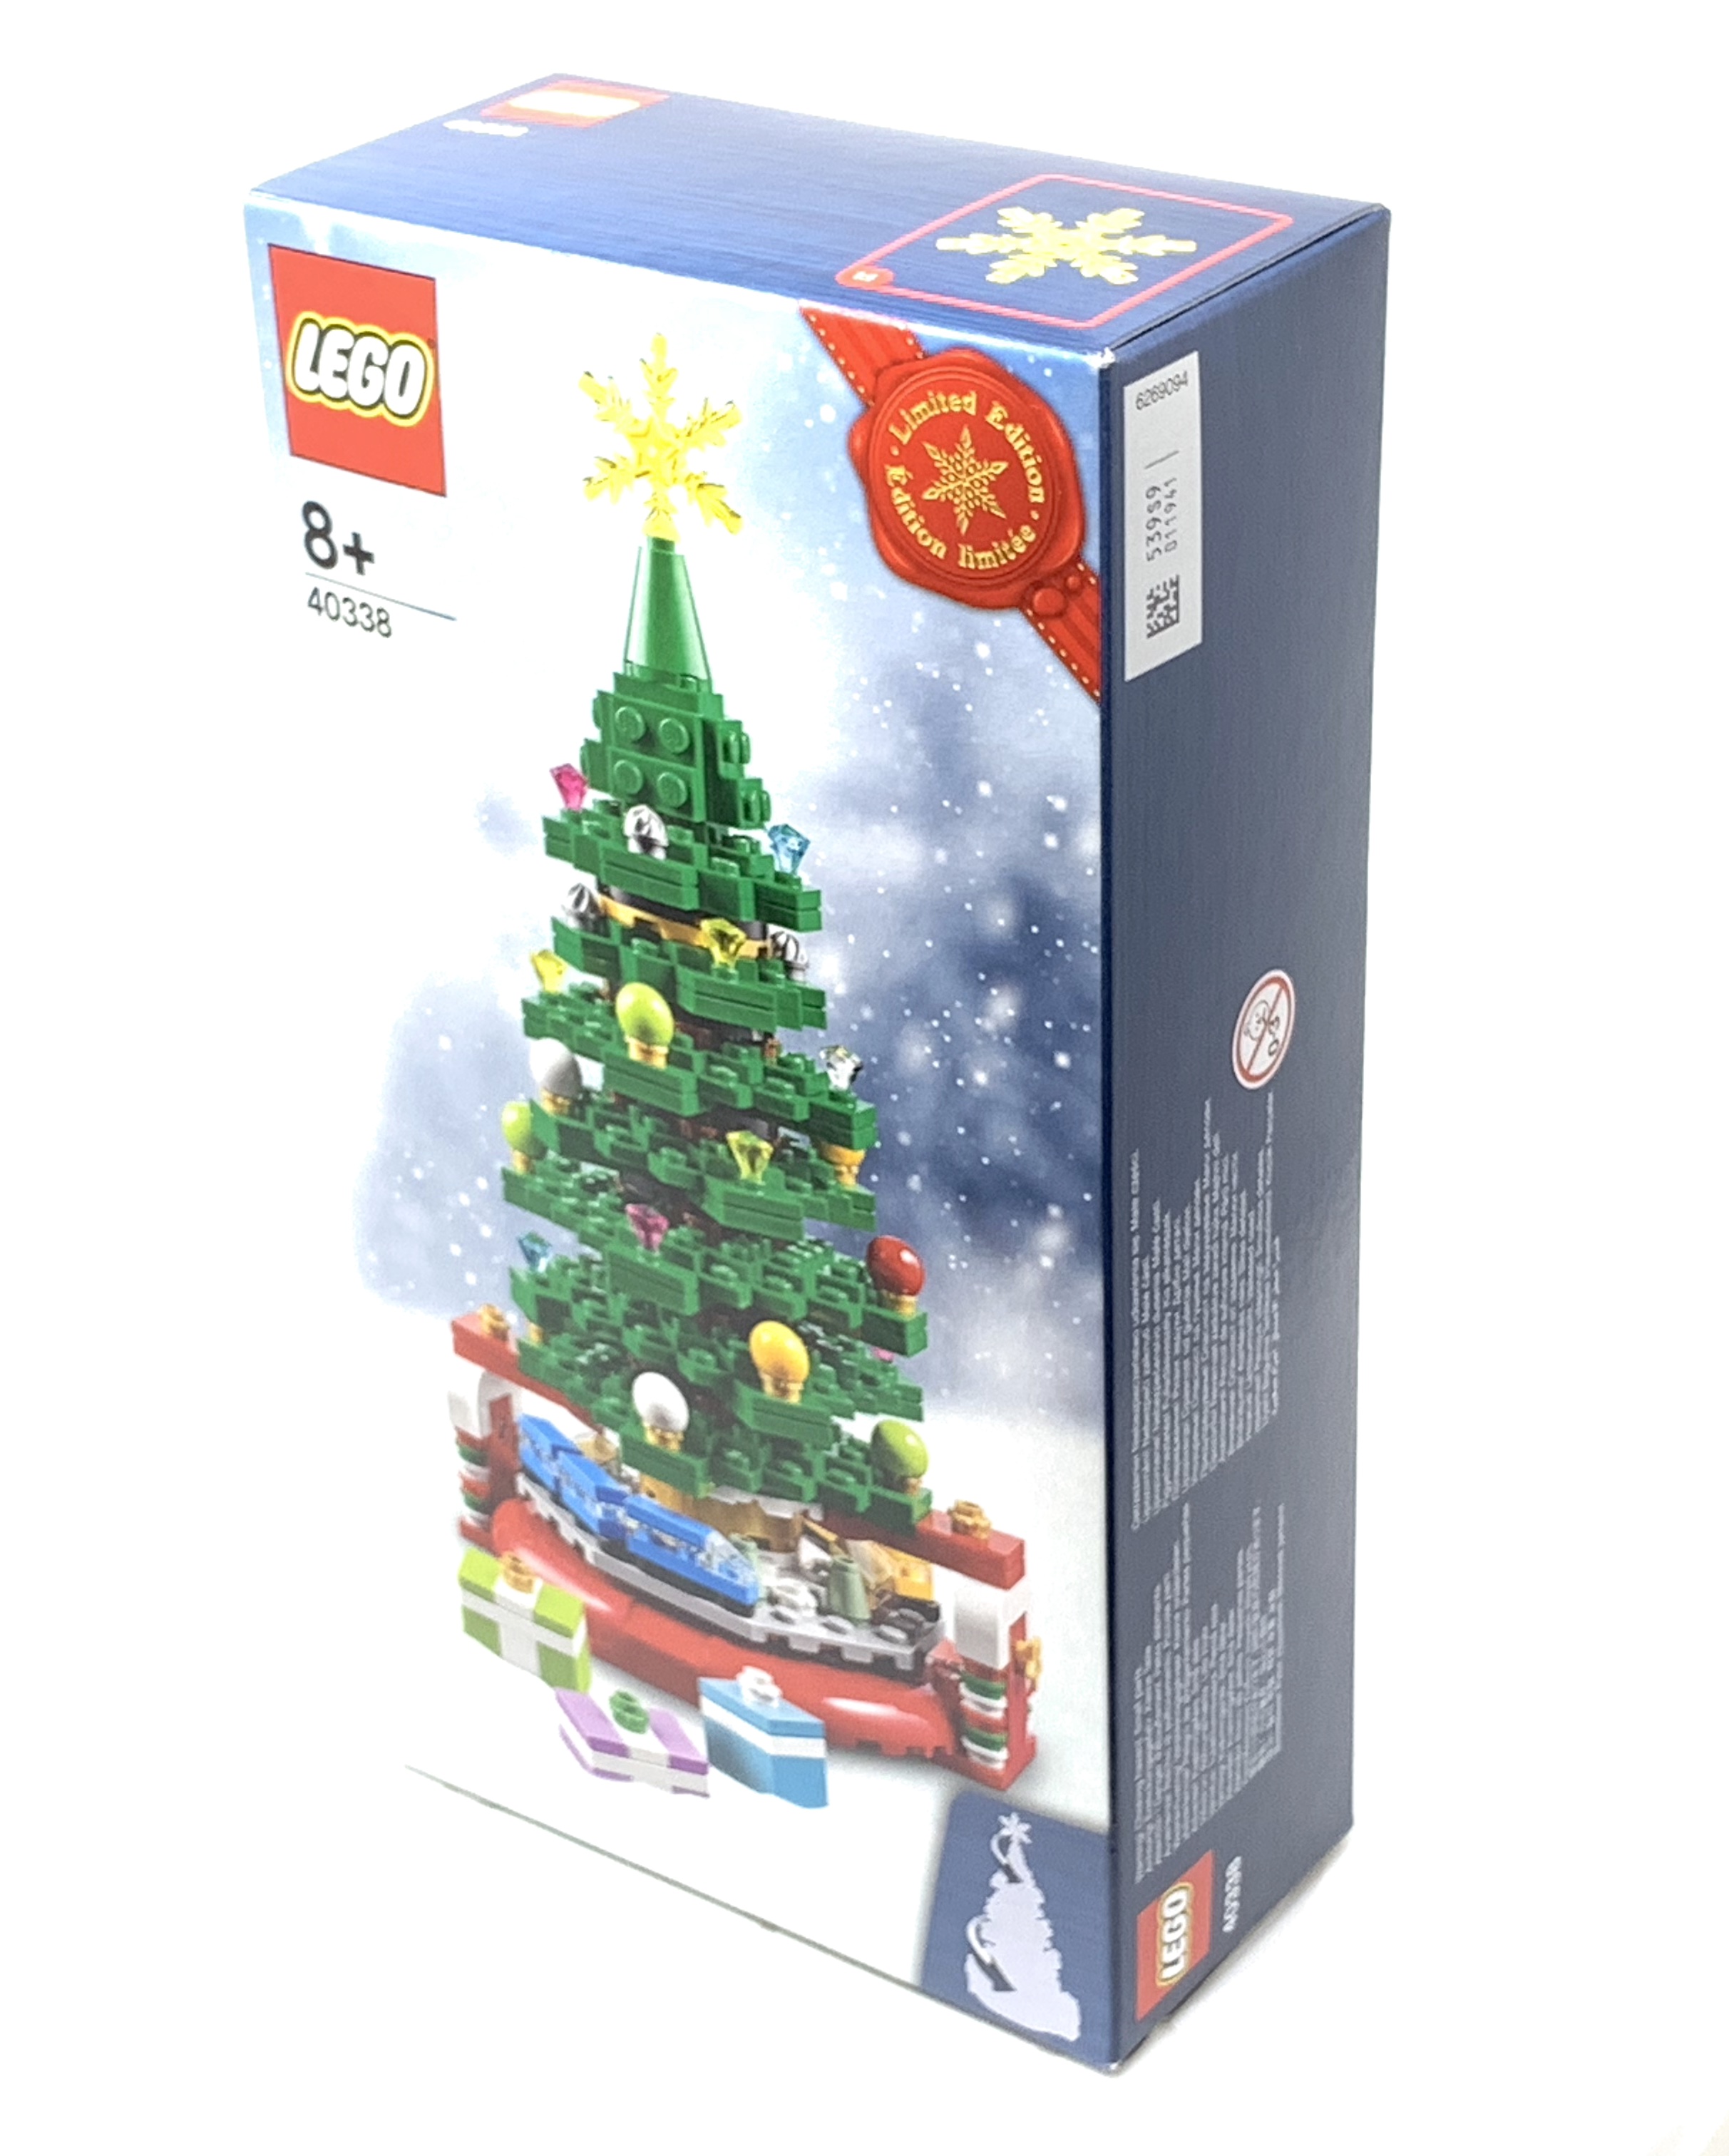 A LEGO Christmas Tree Just Before Christmas